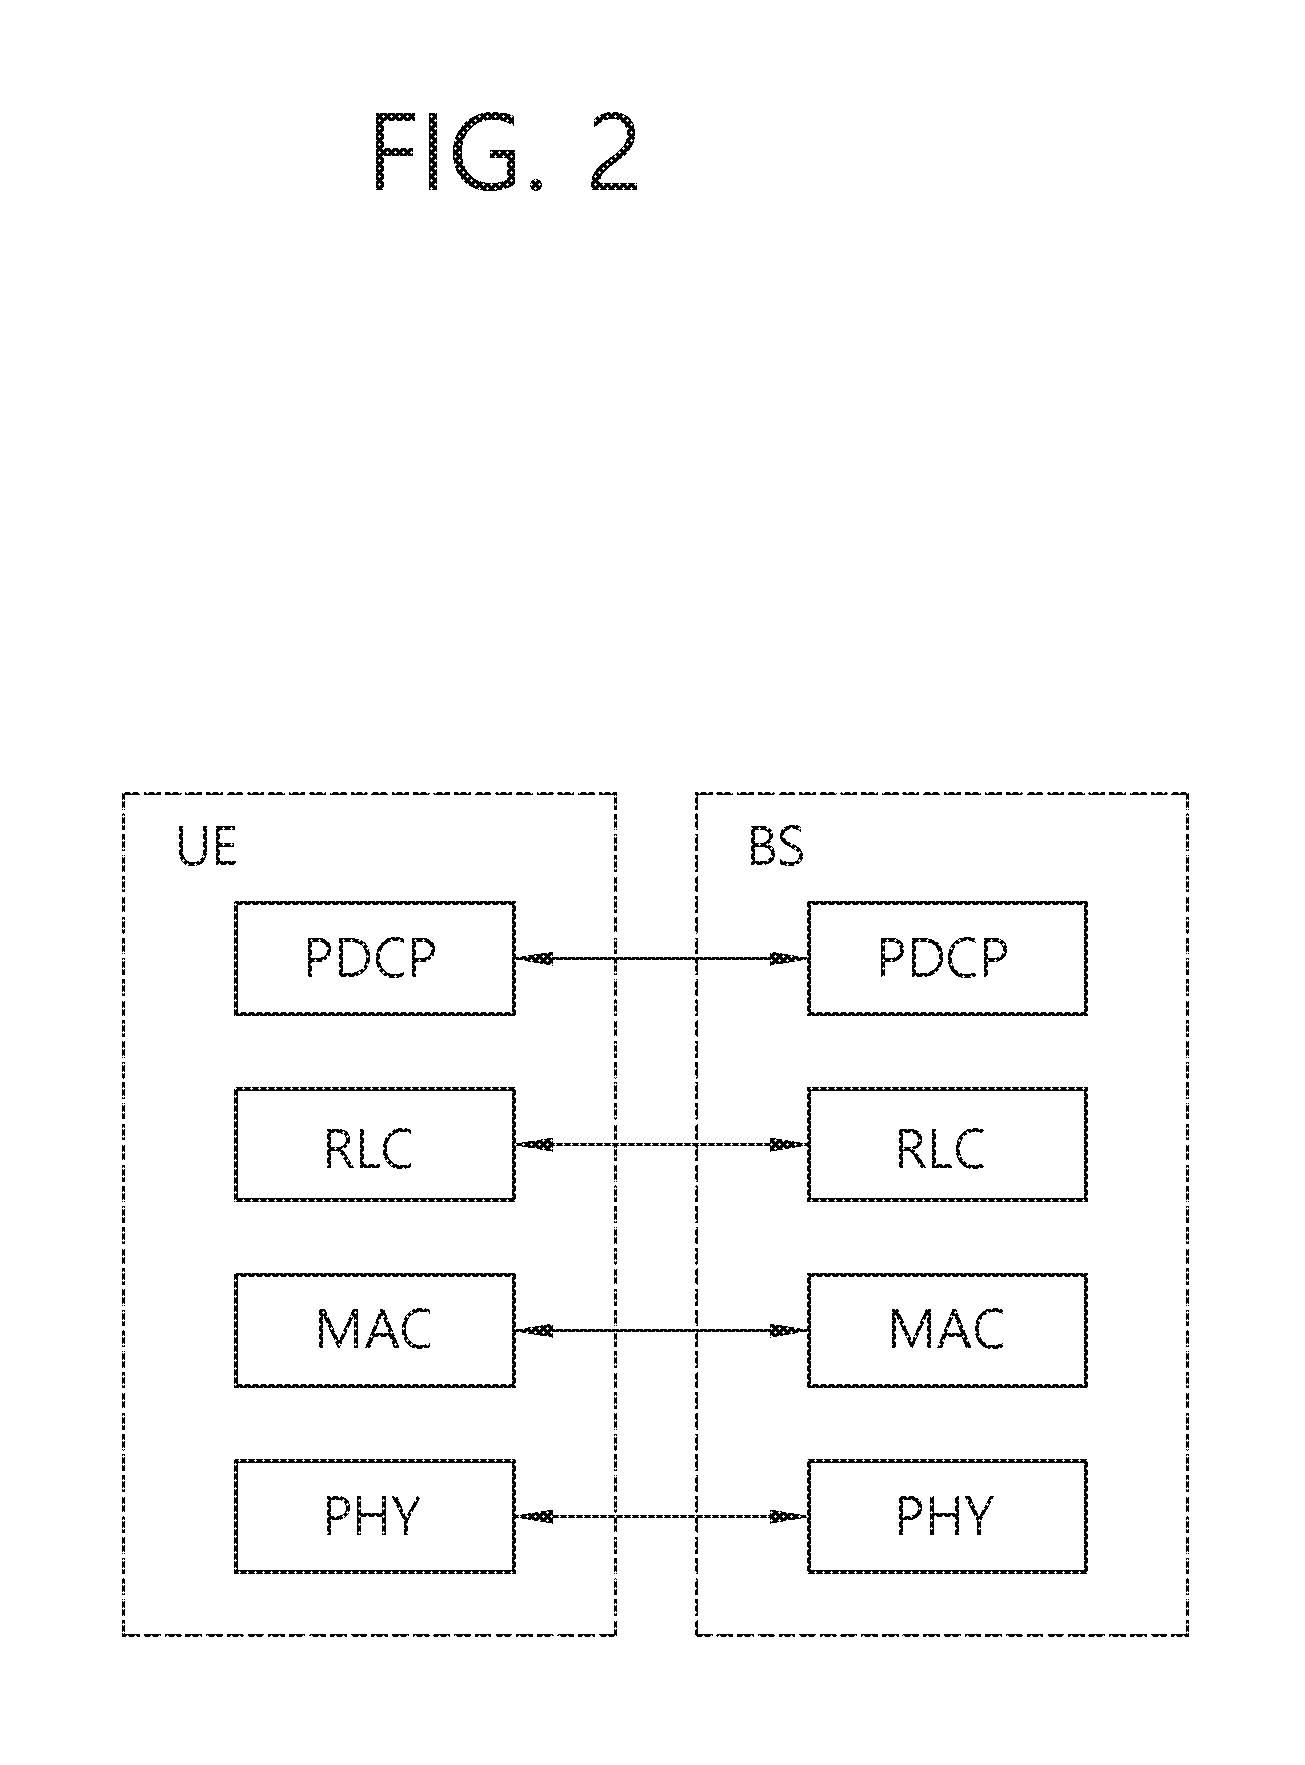 Cell selection method and measurement method for cell reselection